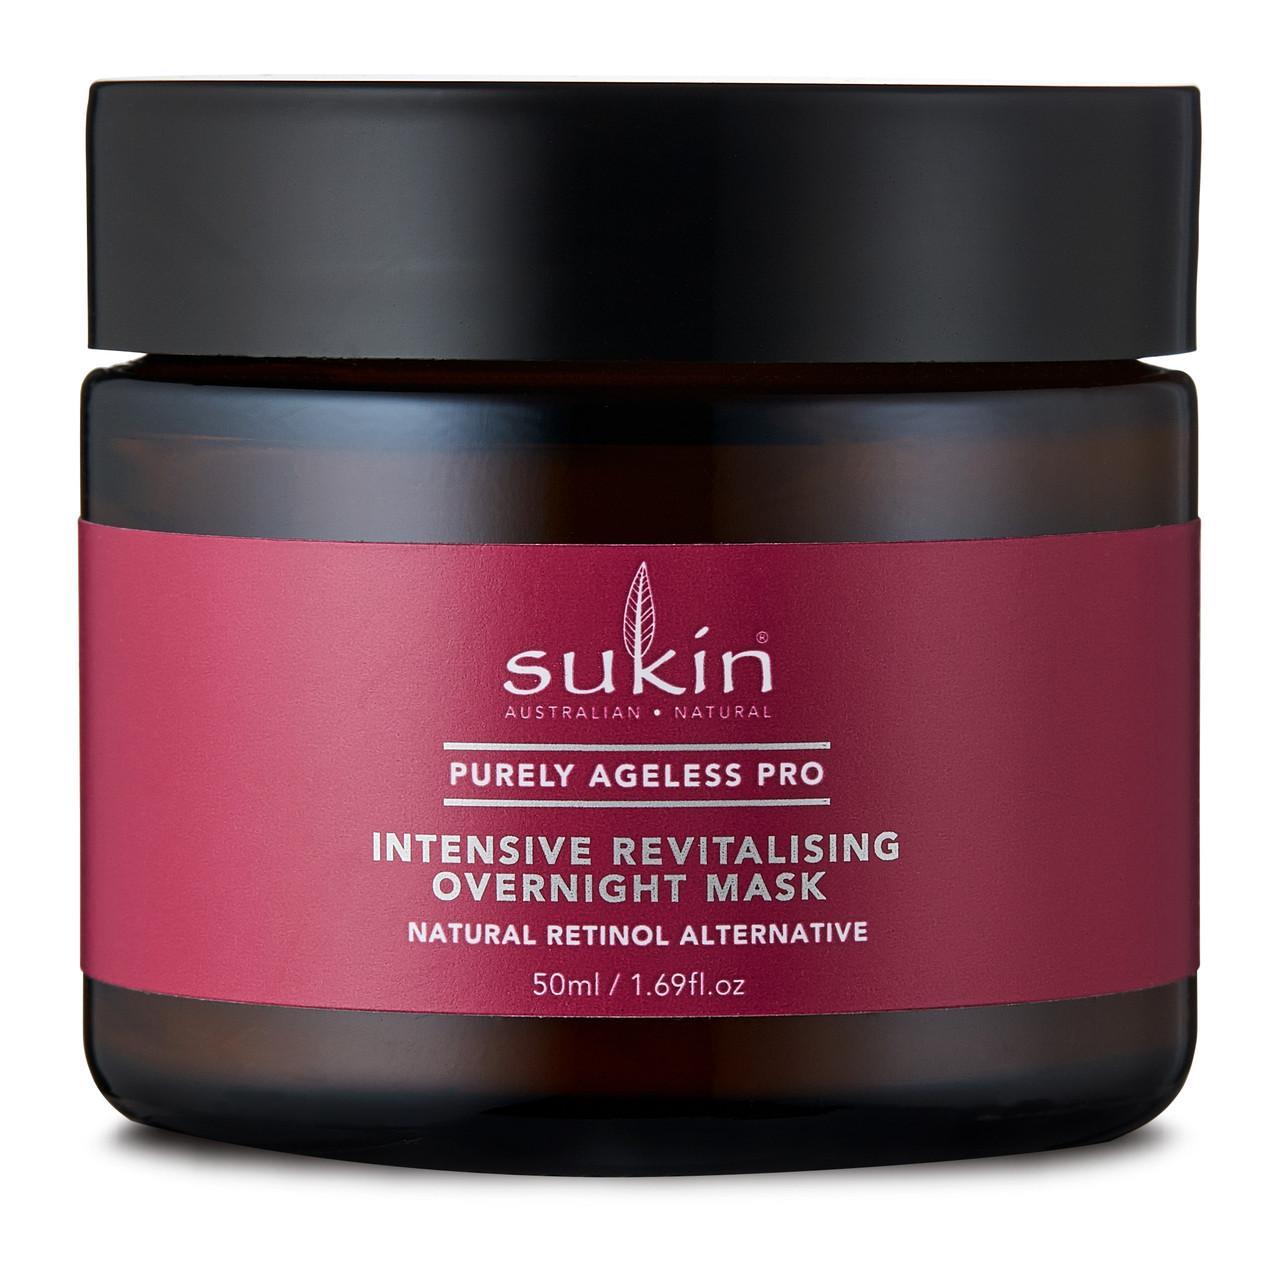 Sukin Purely Ageless Pro Firming Intensive Revitalising Overnight Mask 50ml 50ml